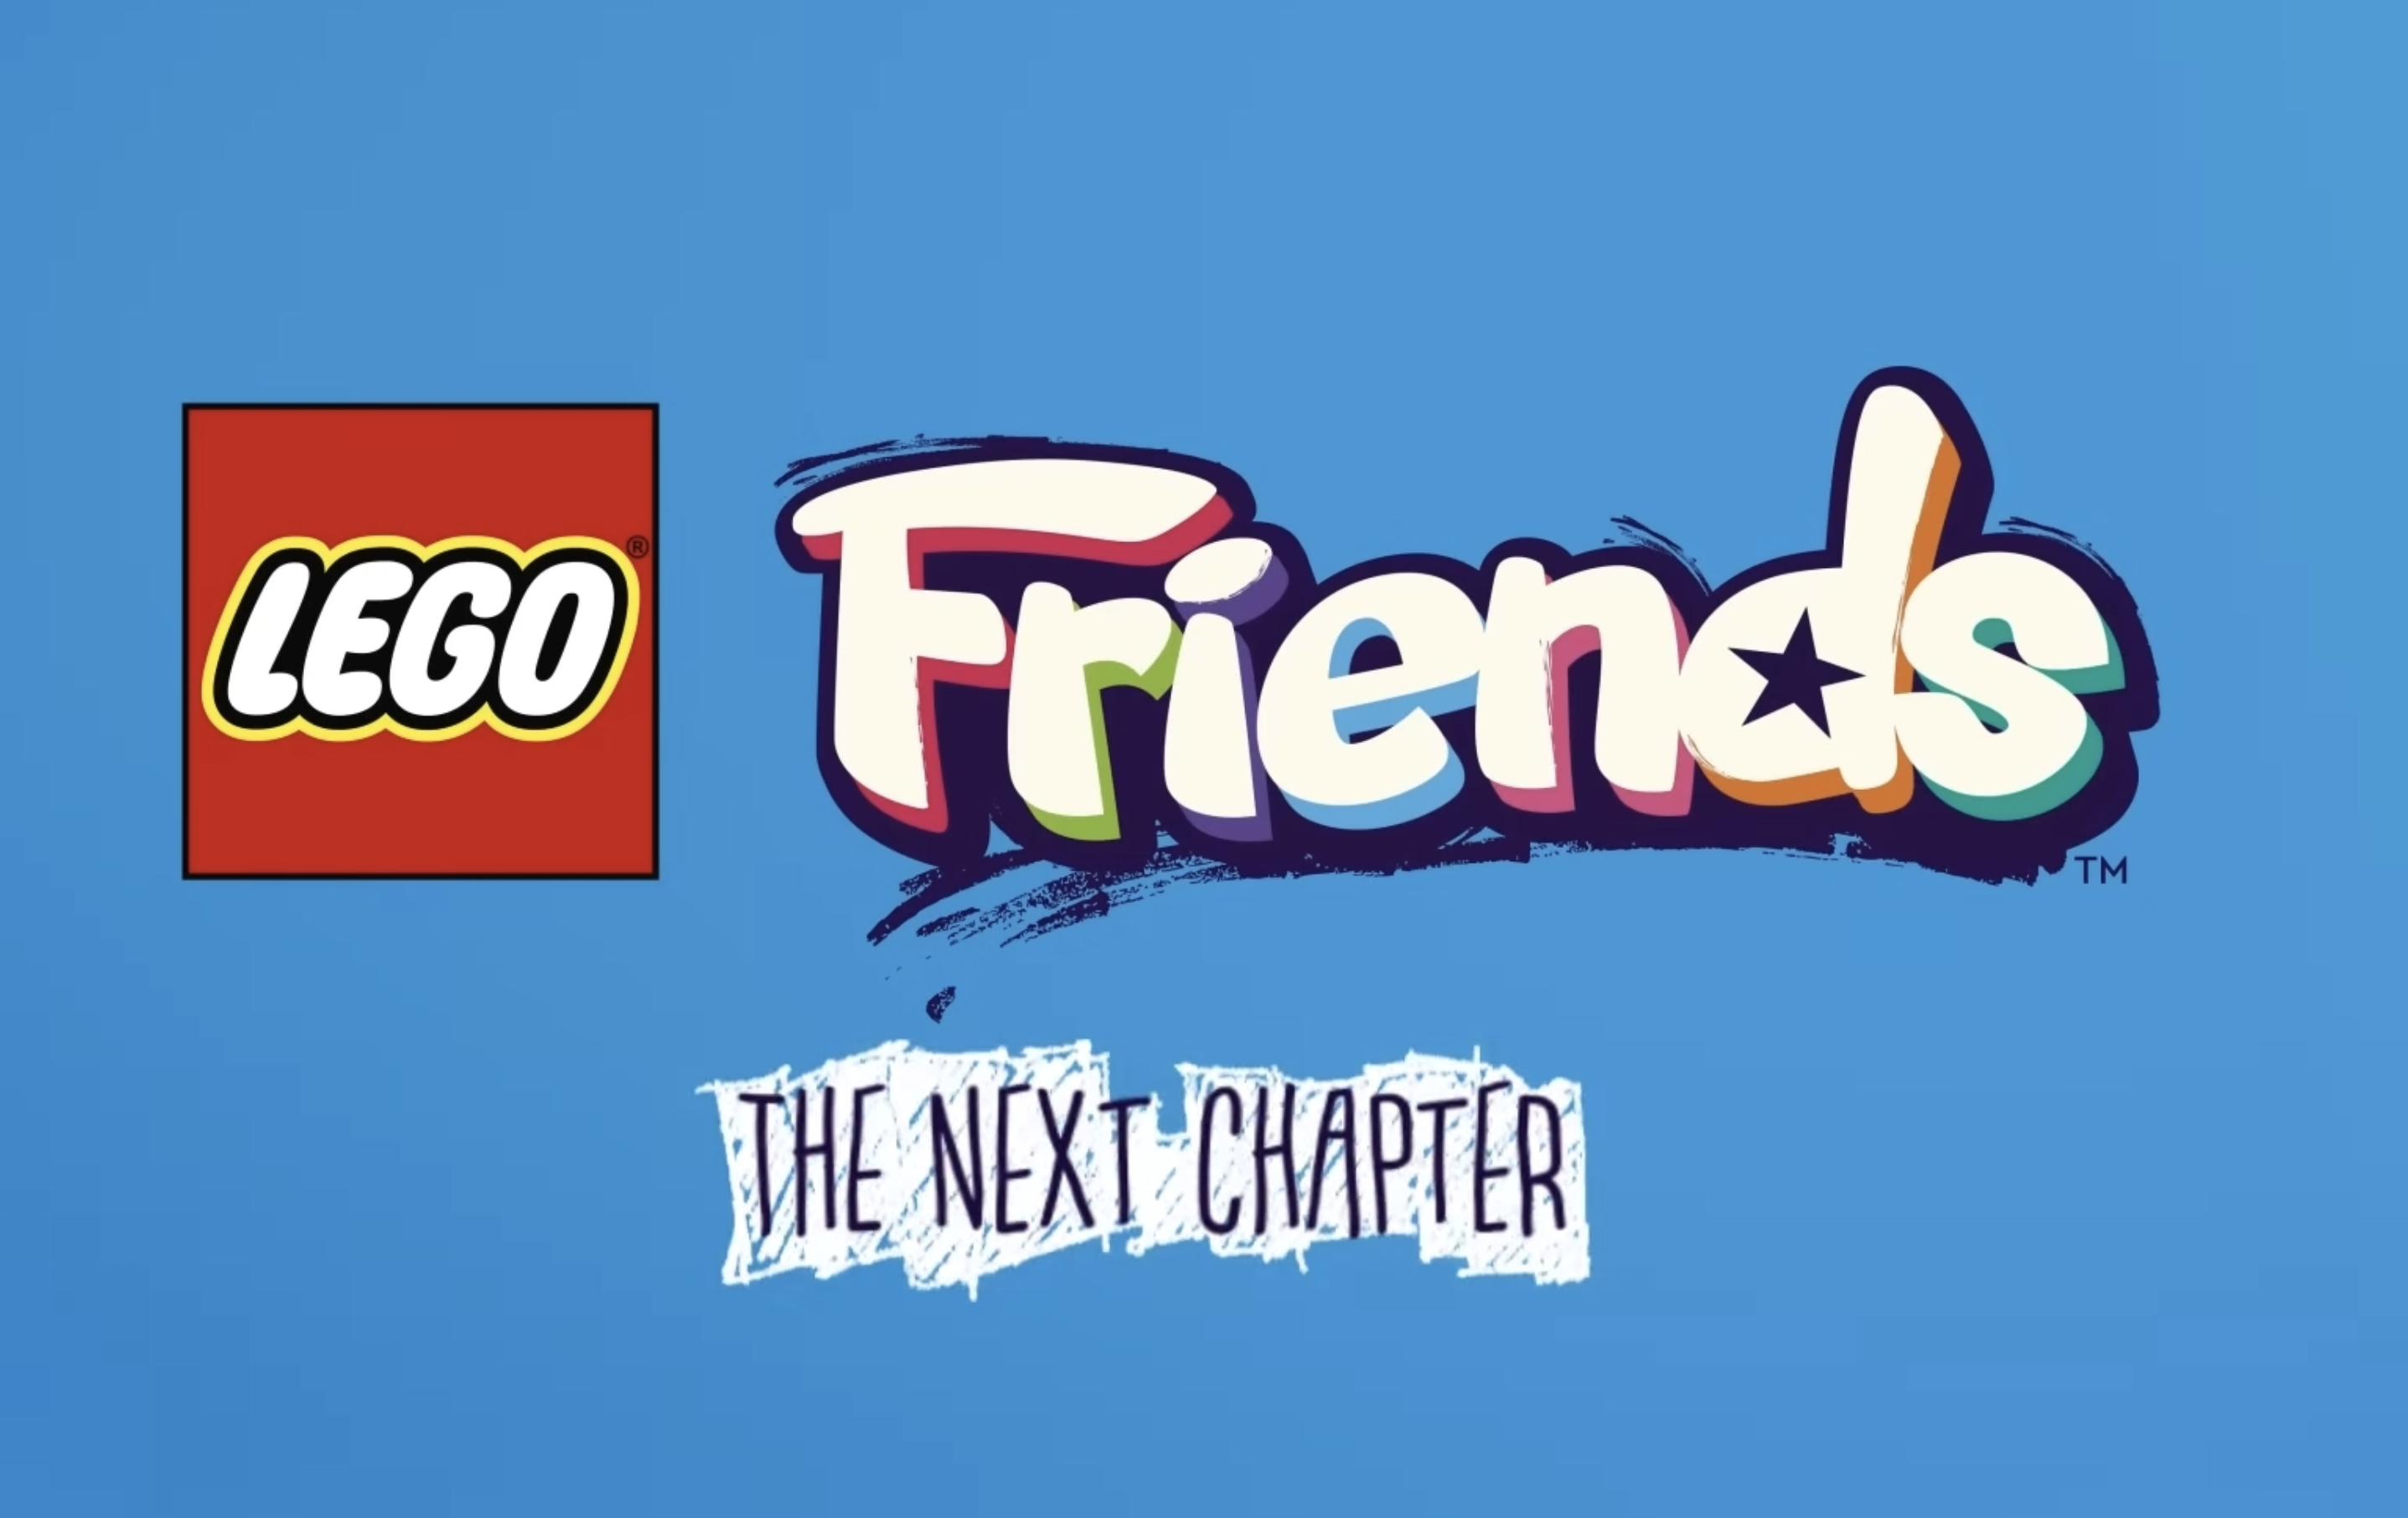 New LEGO Friends show is now available!